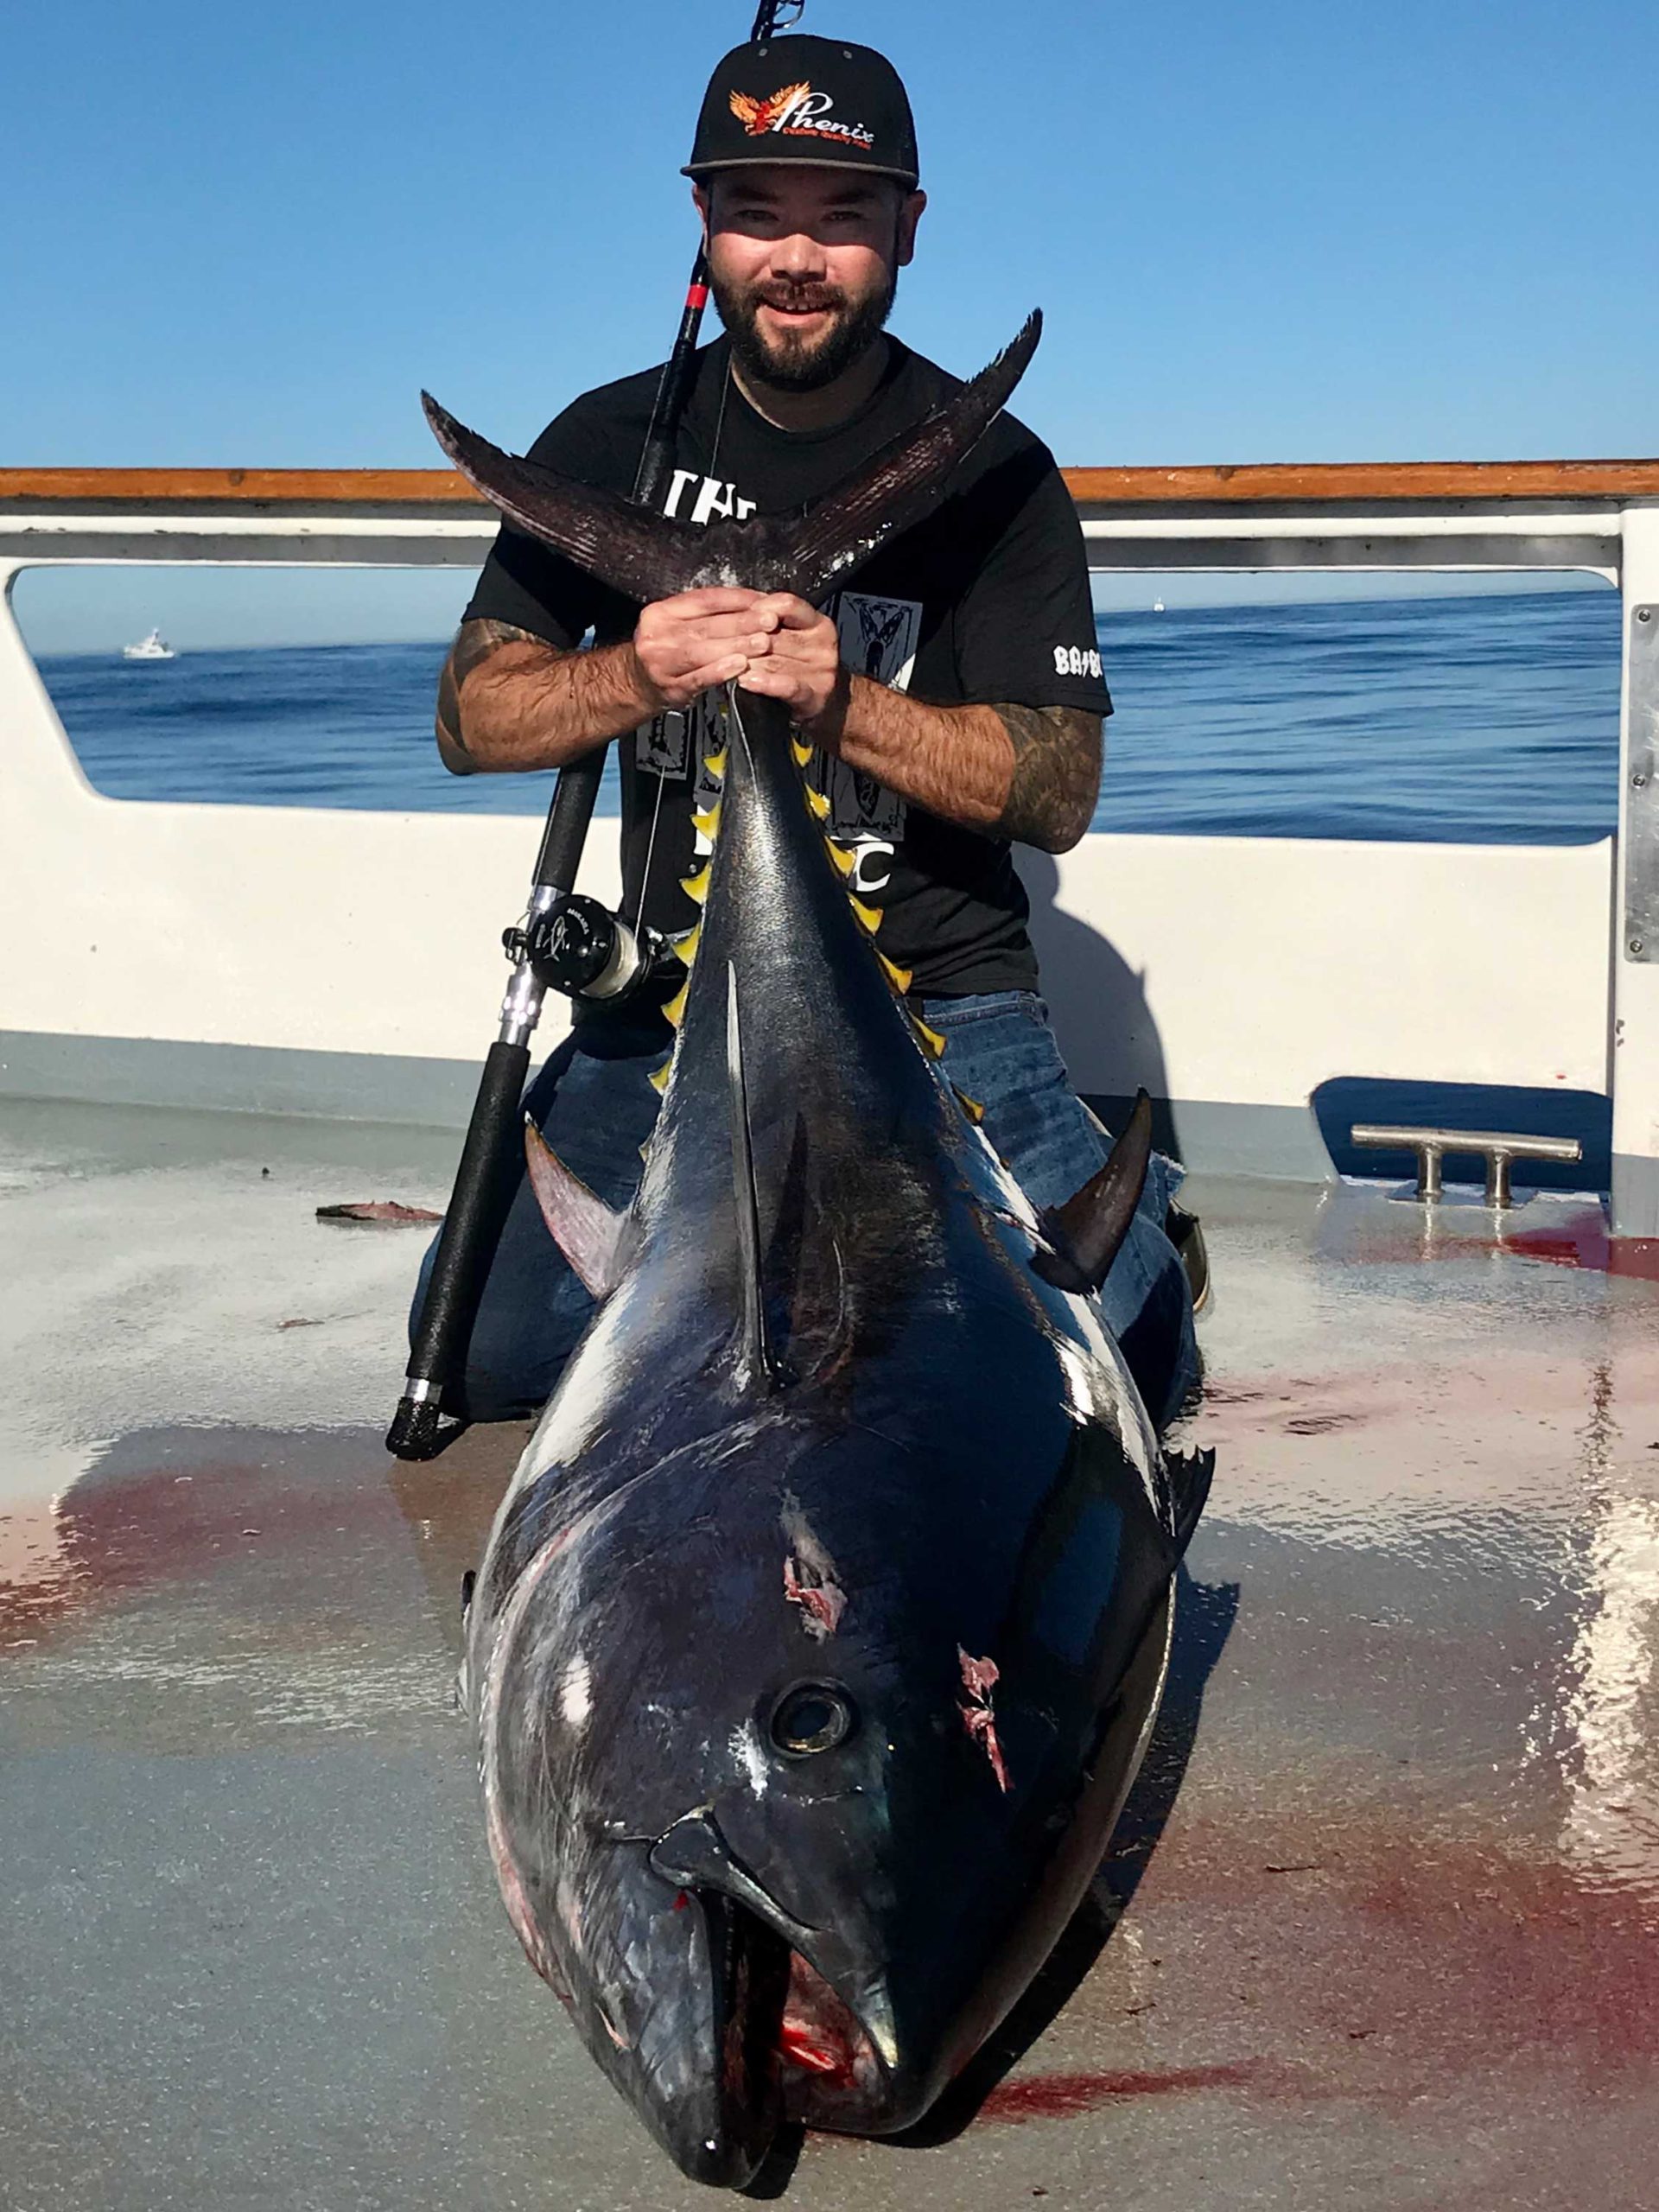 First person report: A Tanner bank bluefin tango